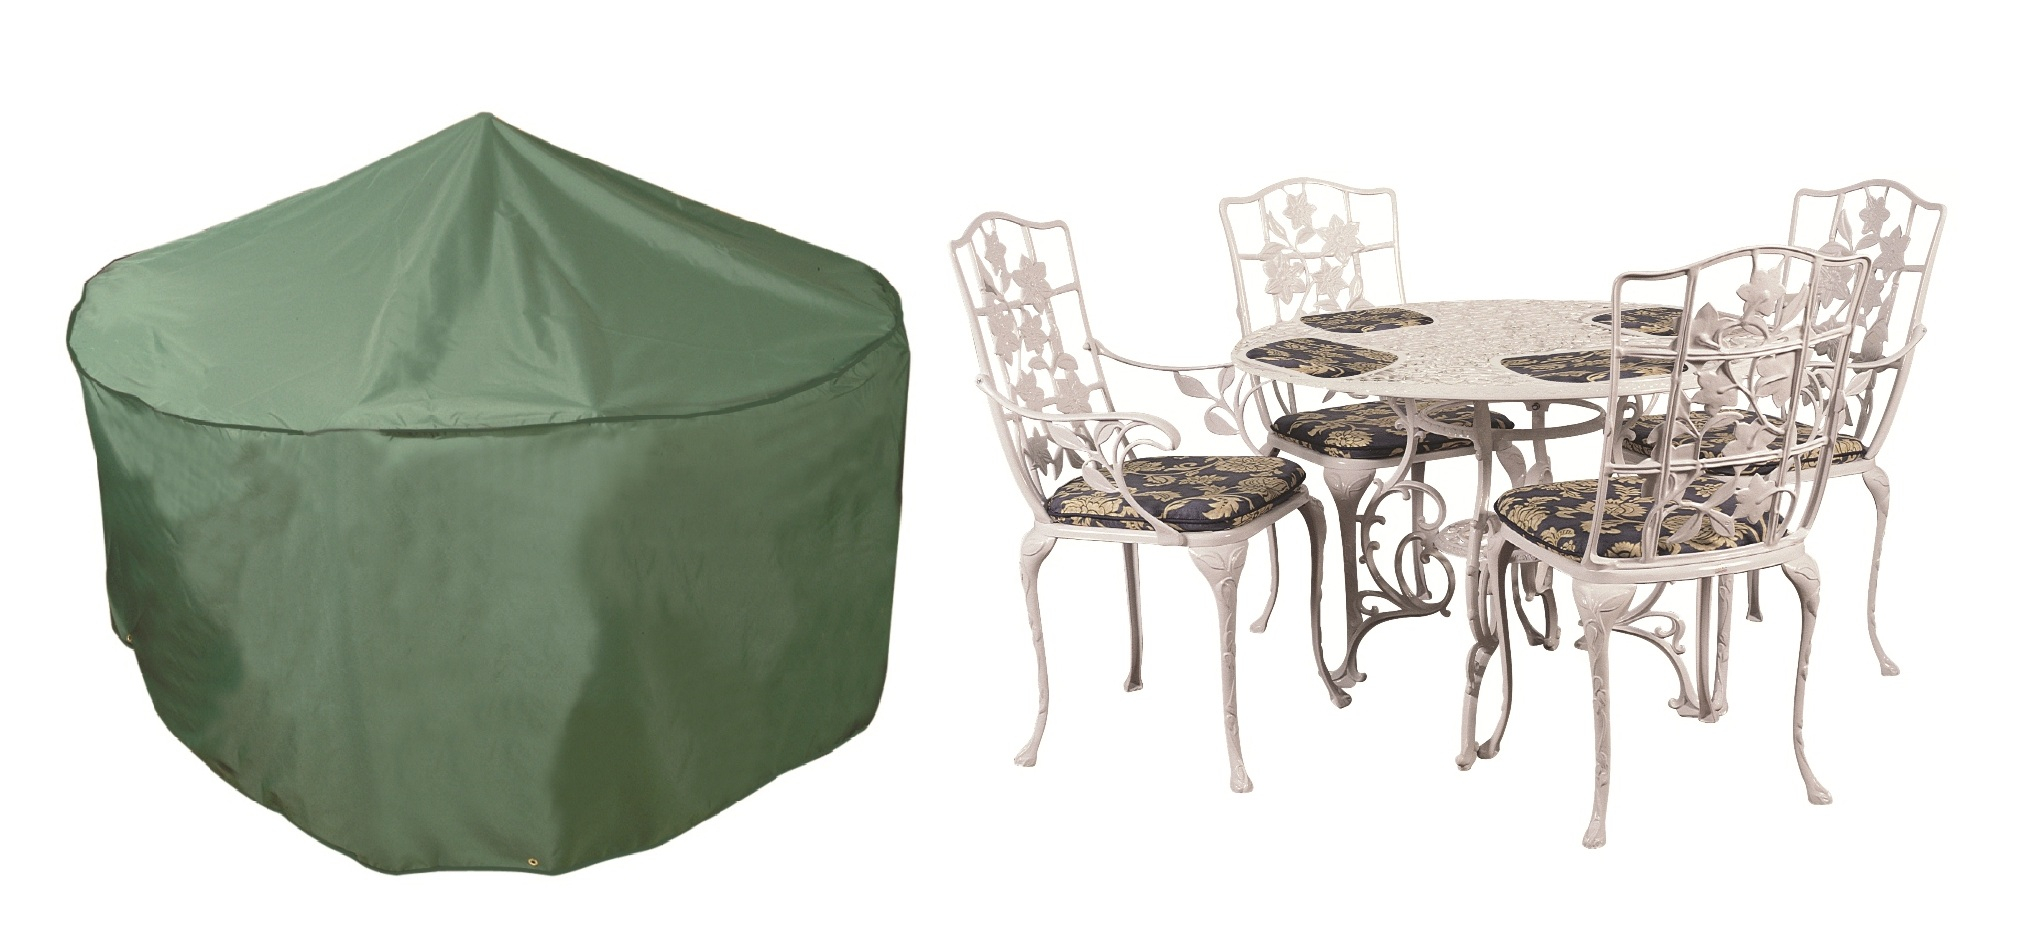 Bosmere Cover Up 163cm 4 Seater Green Circular Patio Set Garden Furniture Cover in size 2025 X 945